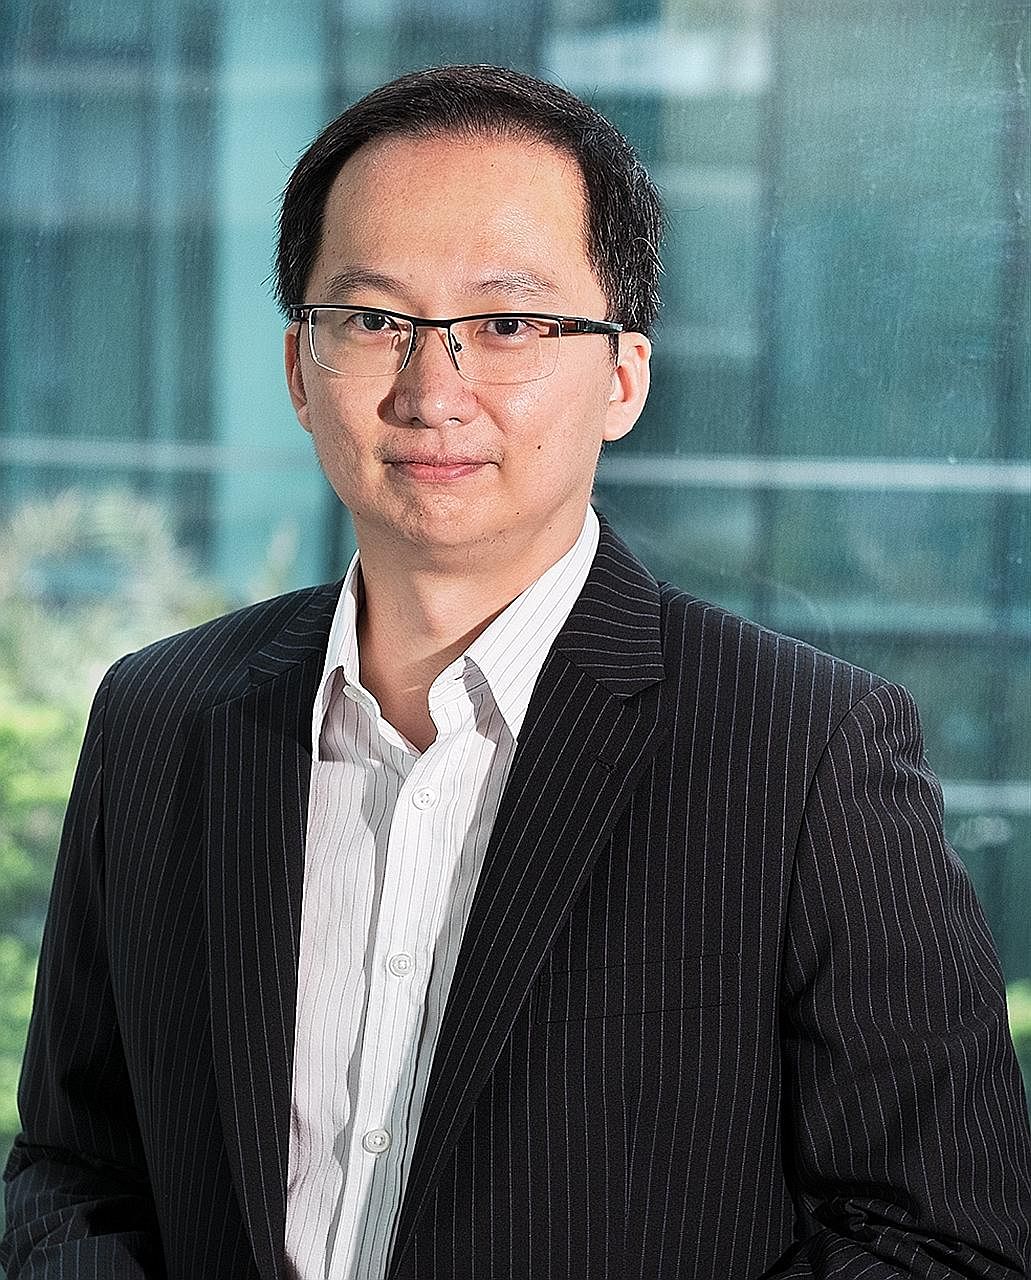 Mr Freddy Lim, digital wealth management firm StashAway's co-founder, says major providers of index-tracking funds have been boosting their corporate governance resources in recent years.